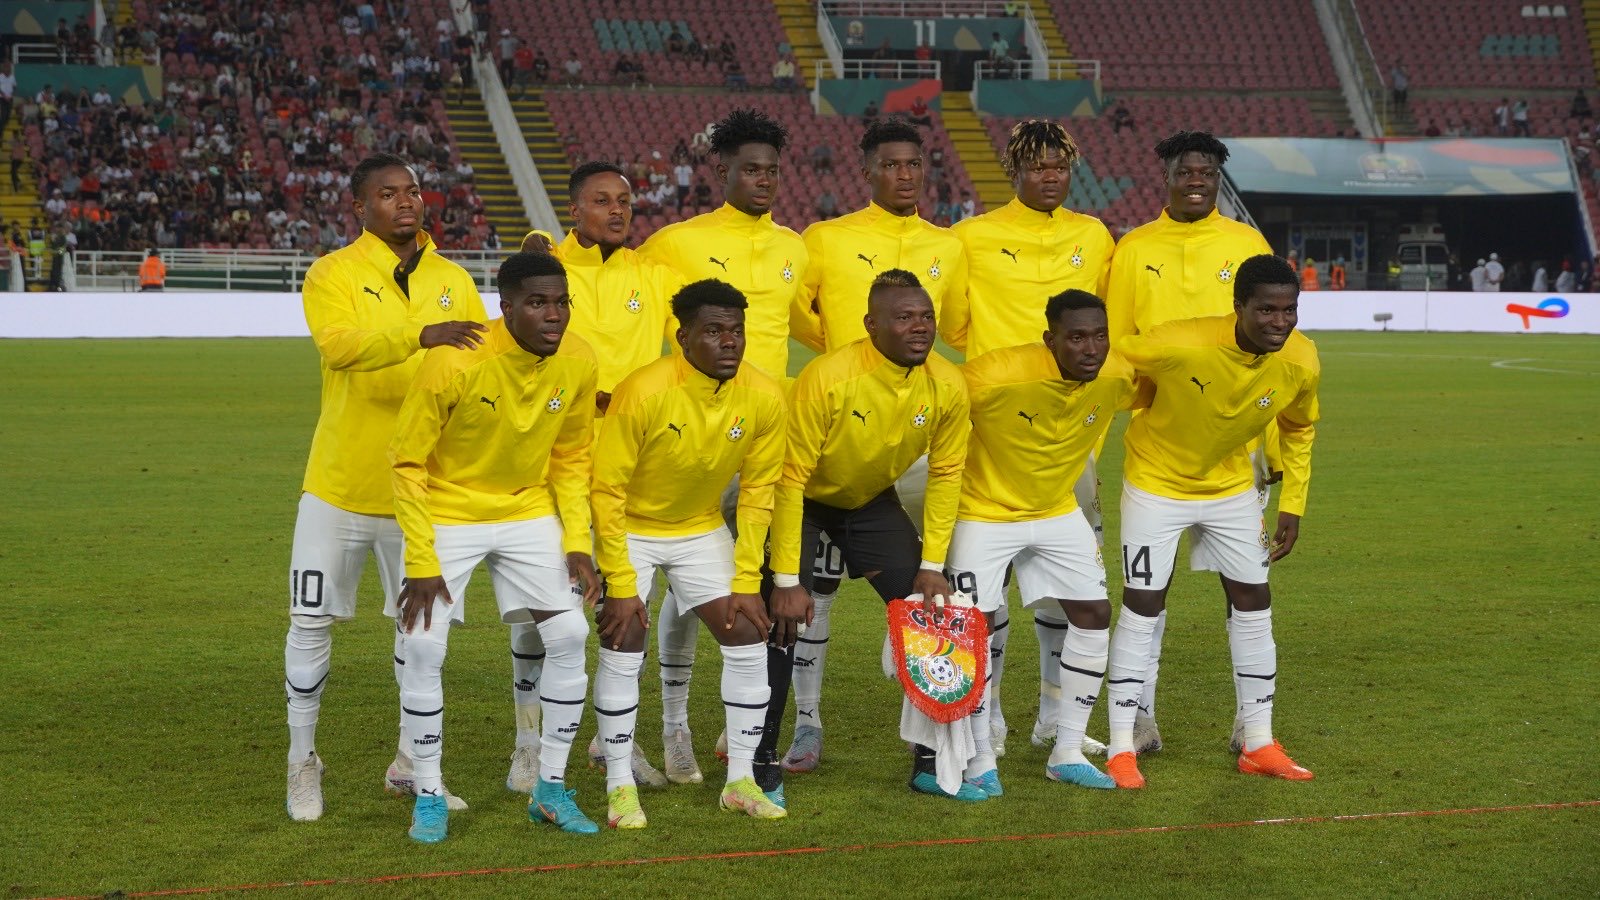 2023 U-23 AFCON: ‘Ghana needs to catch up before it’s too late’ - Ibrahim Tanko